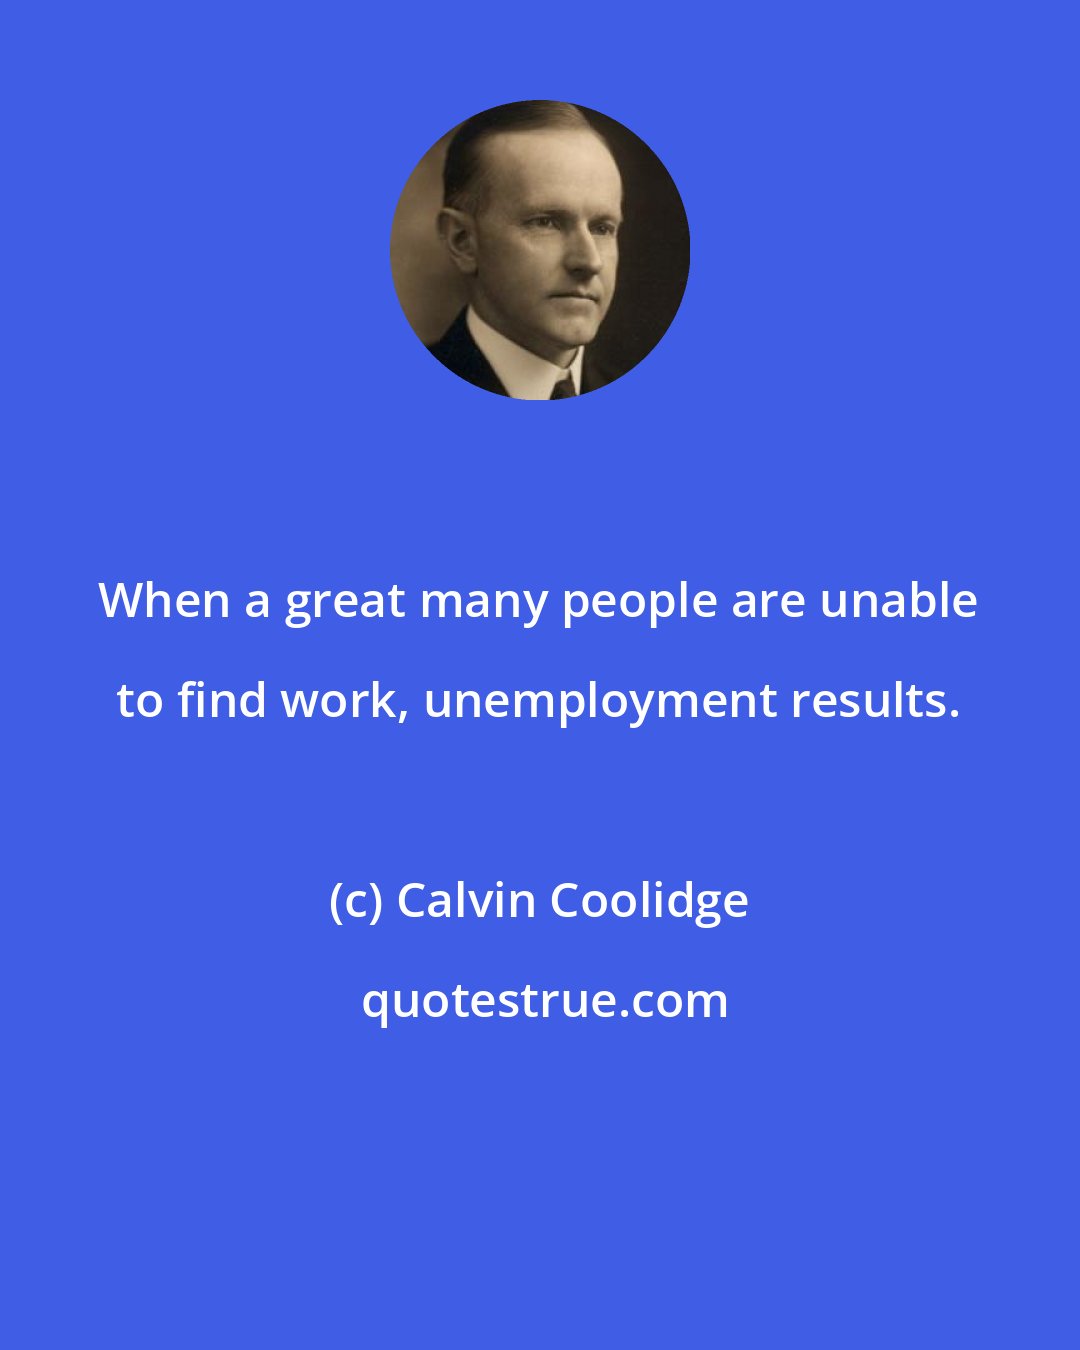 Calvin Coolidge: When a great many people are unable to find work, unemployment results.